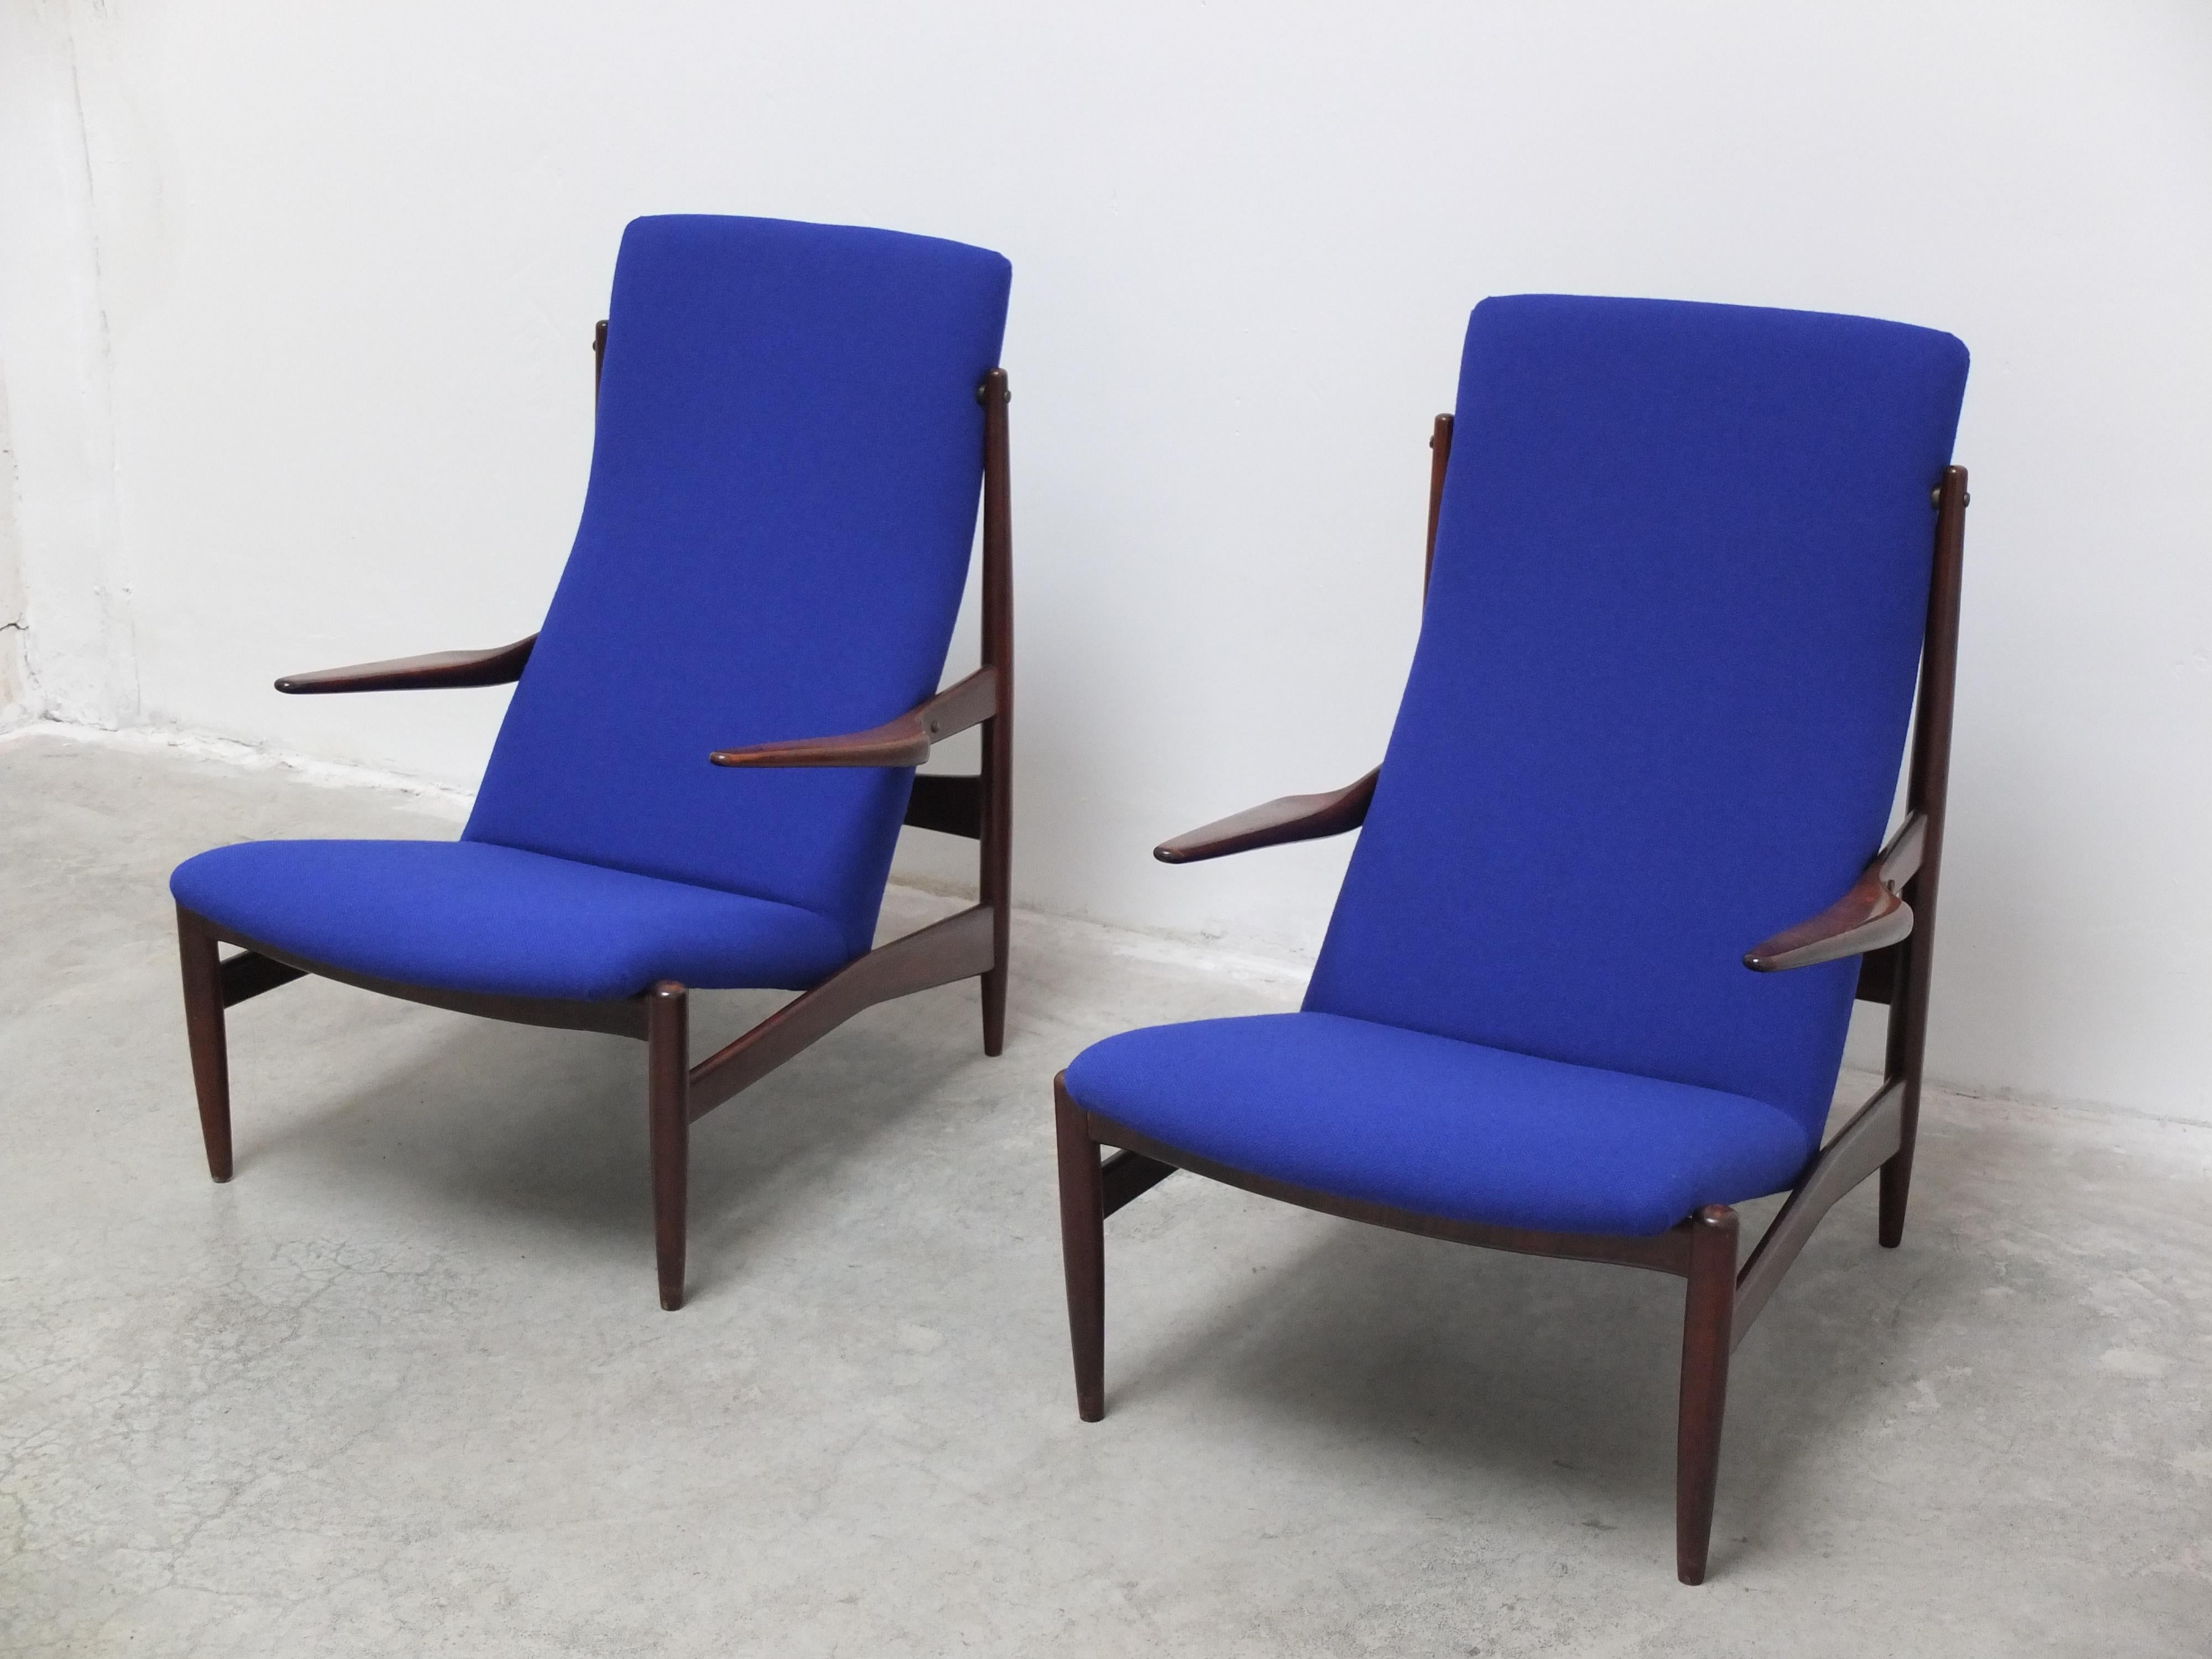 Rare Pair of Lounge Chairs by Alfred Hendrickx for Belform, 1950s For Sale 1